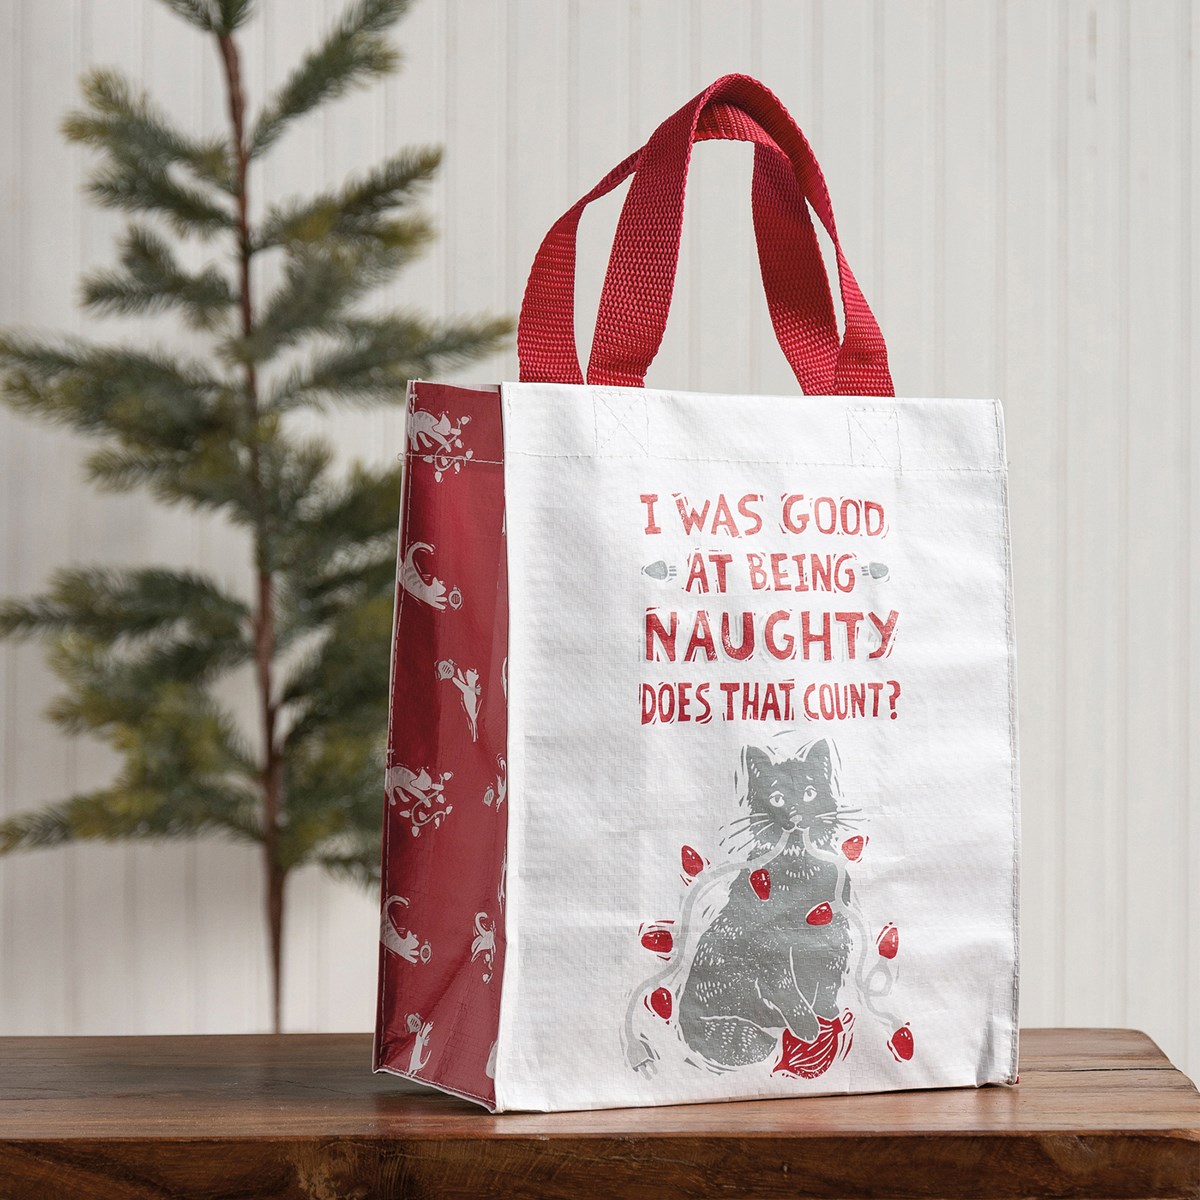 Daily Tote - Good At Being Naughty Cat - 8.75" x 10.25" x 4.75" - Post-Consumer Material, Nylon